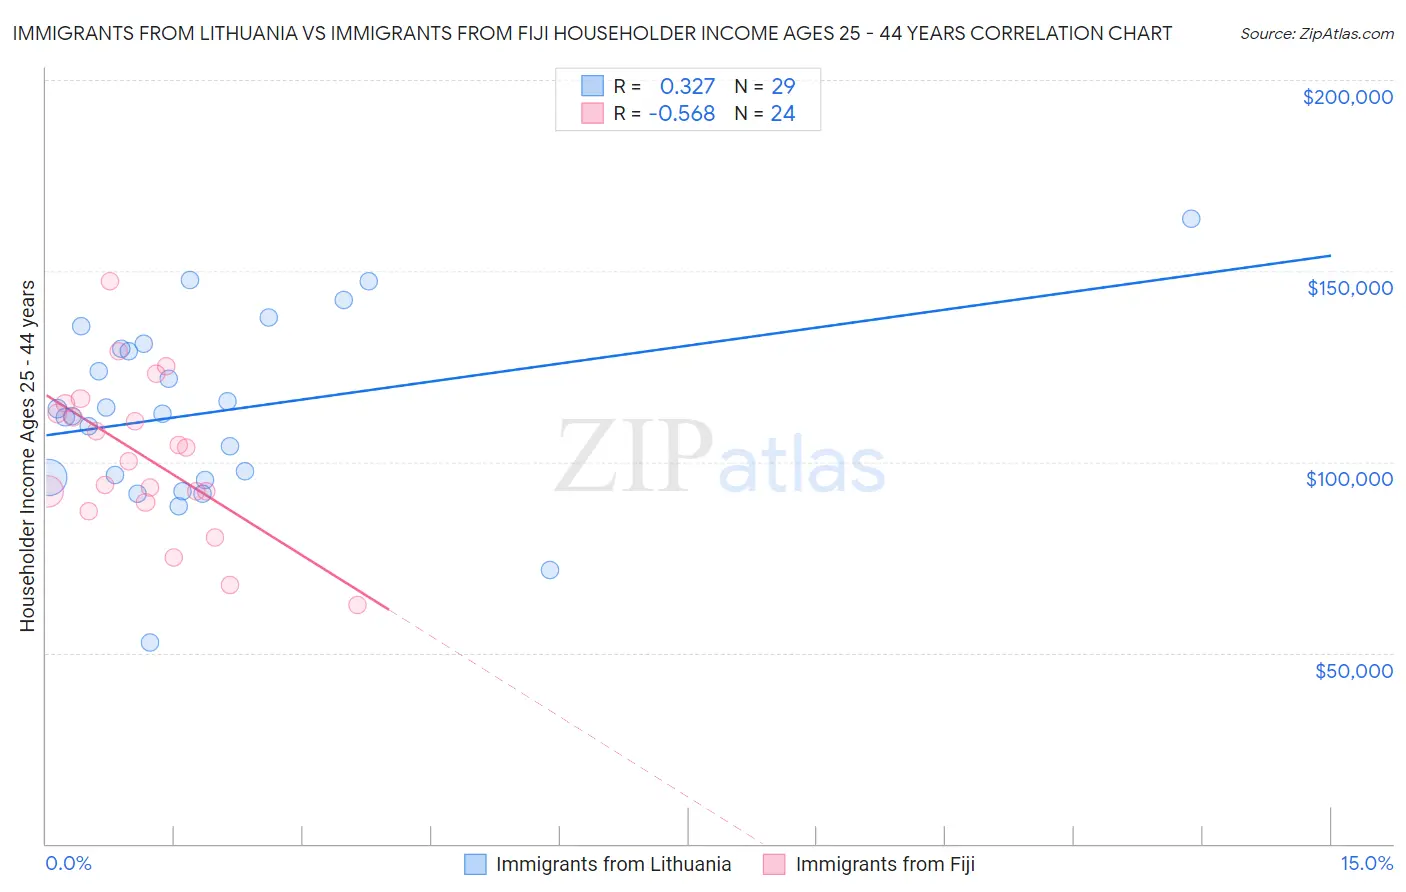 Immigrants from Lithuania vs Immigrants from Fiji Householder Income Ages 25 - 44 years